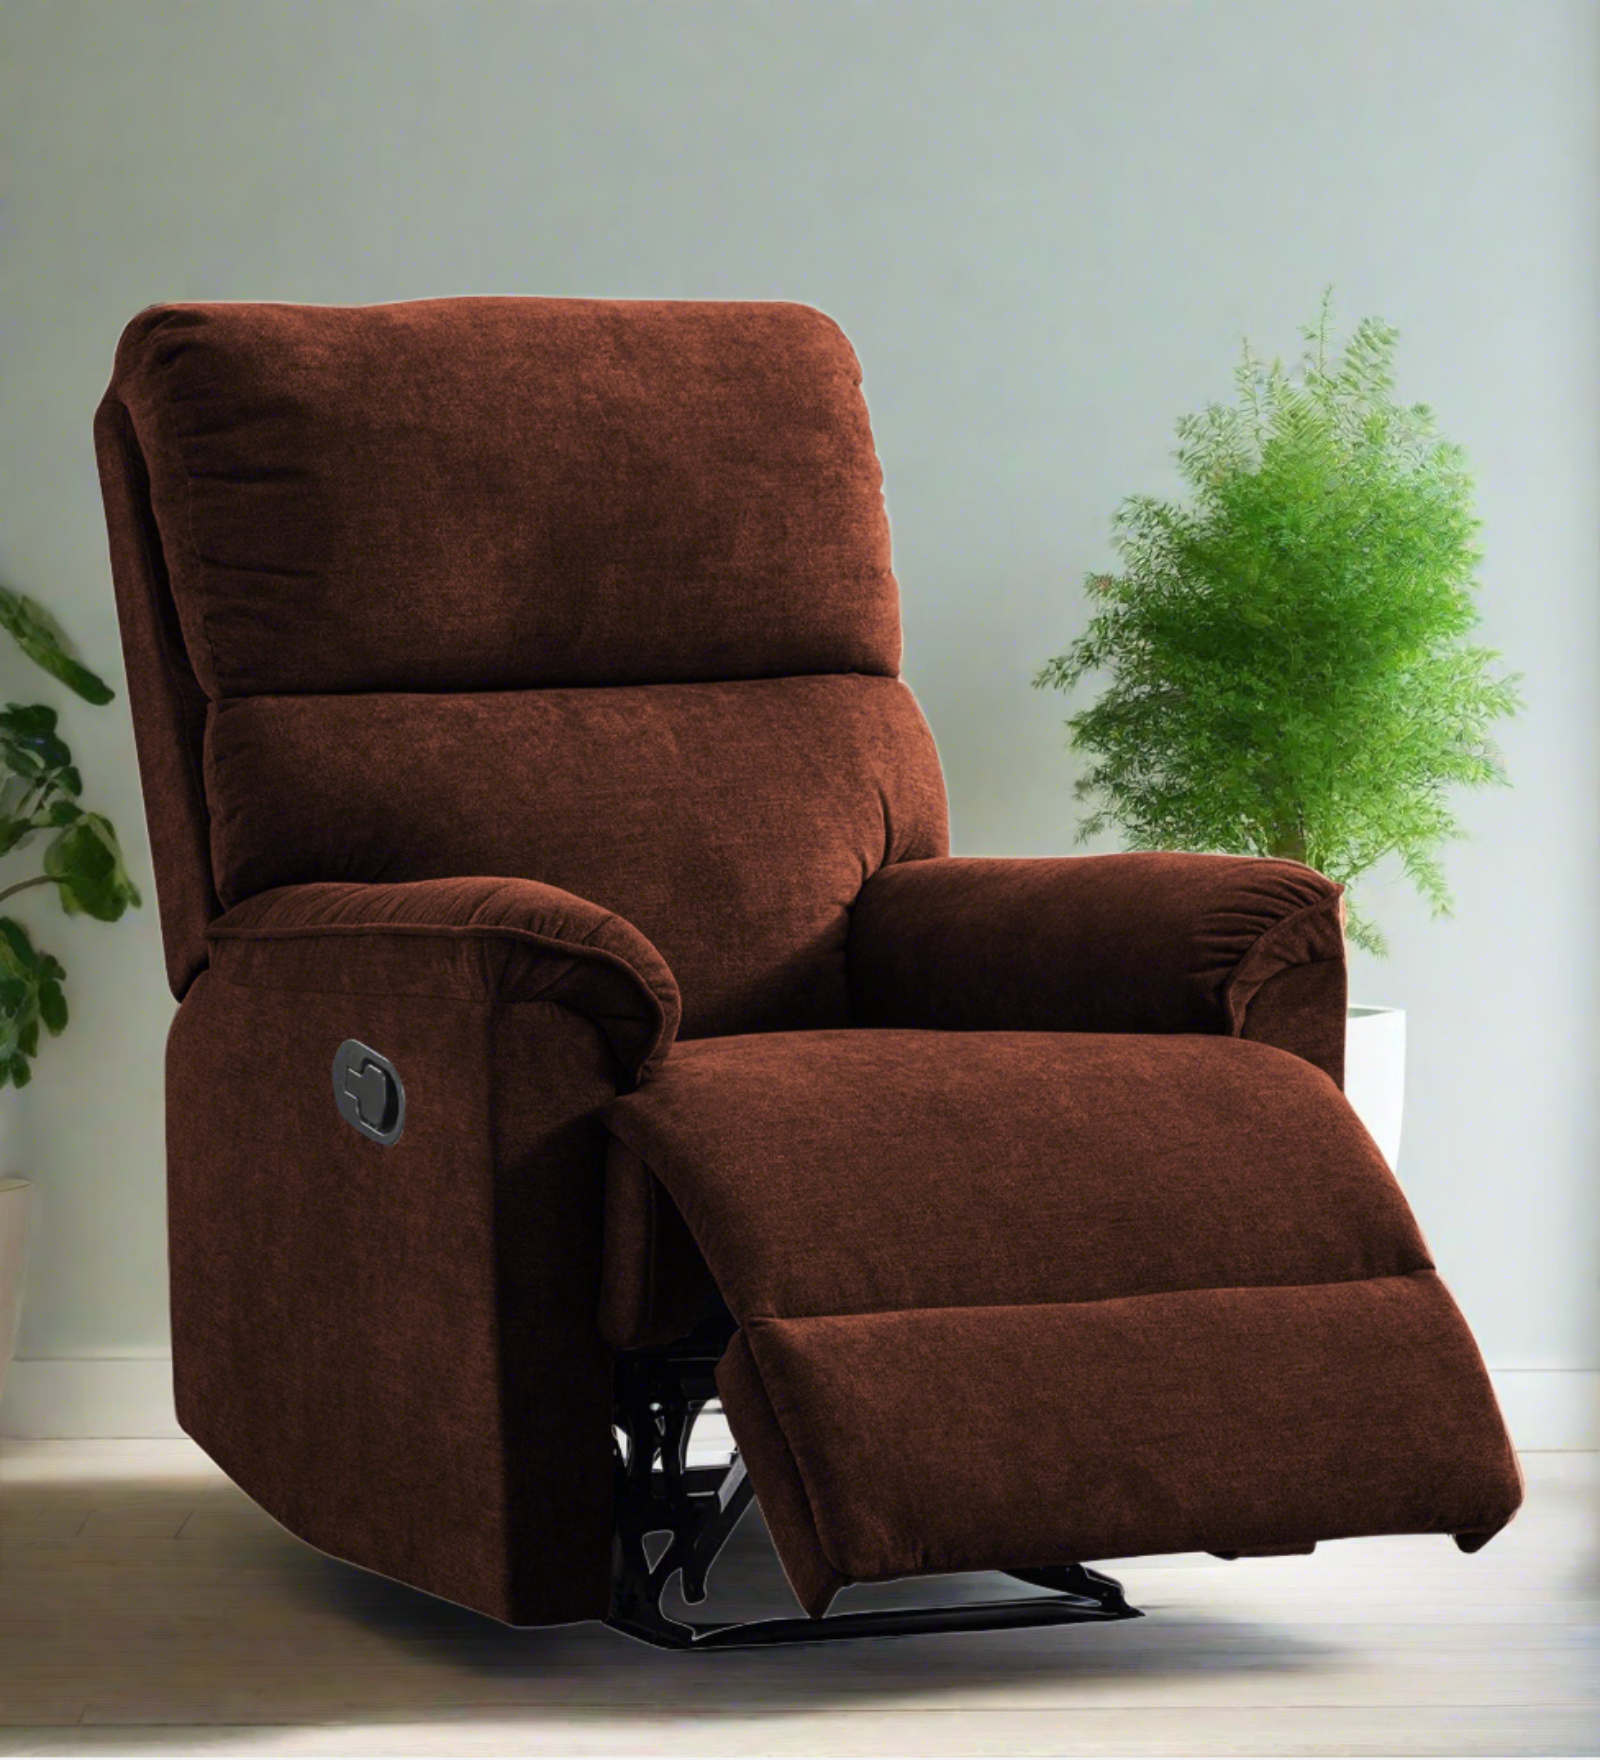 Abby Fabric Manual 1 Seater Recliner In Coffee Brown Colour